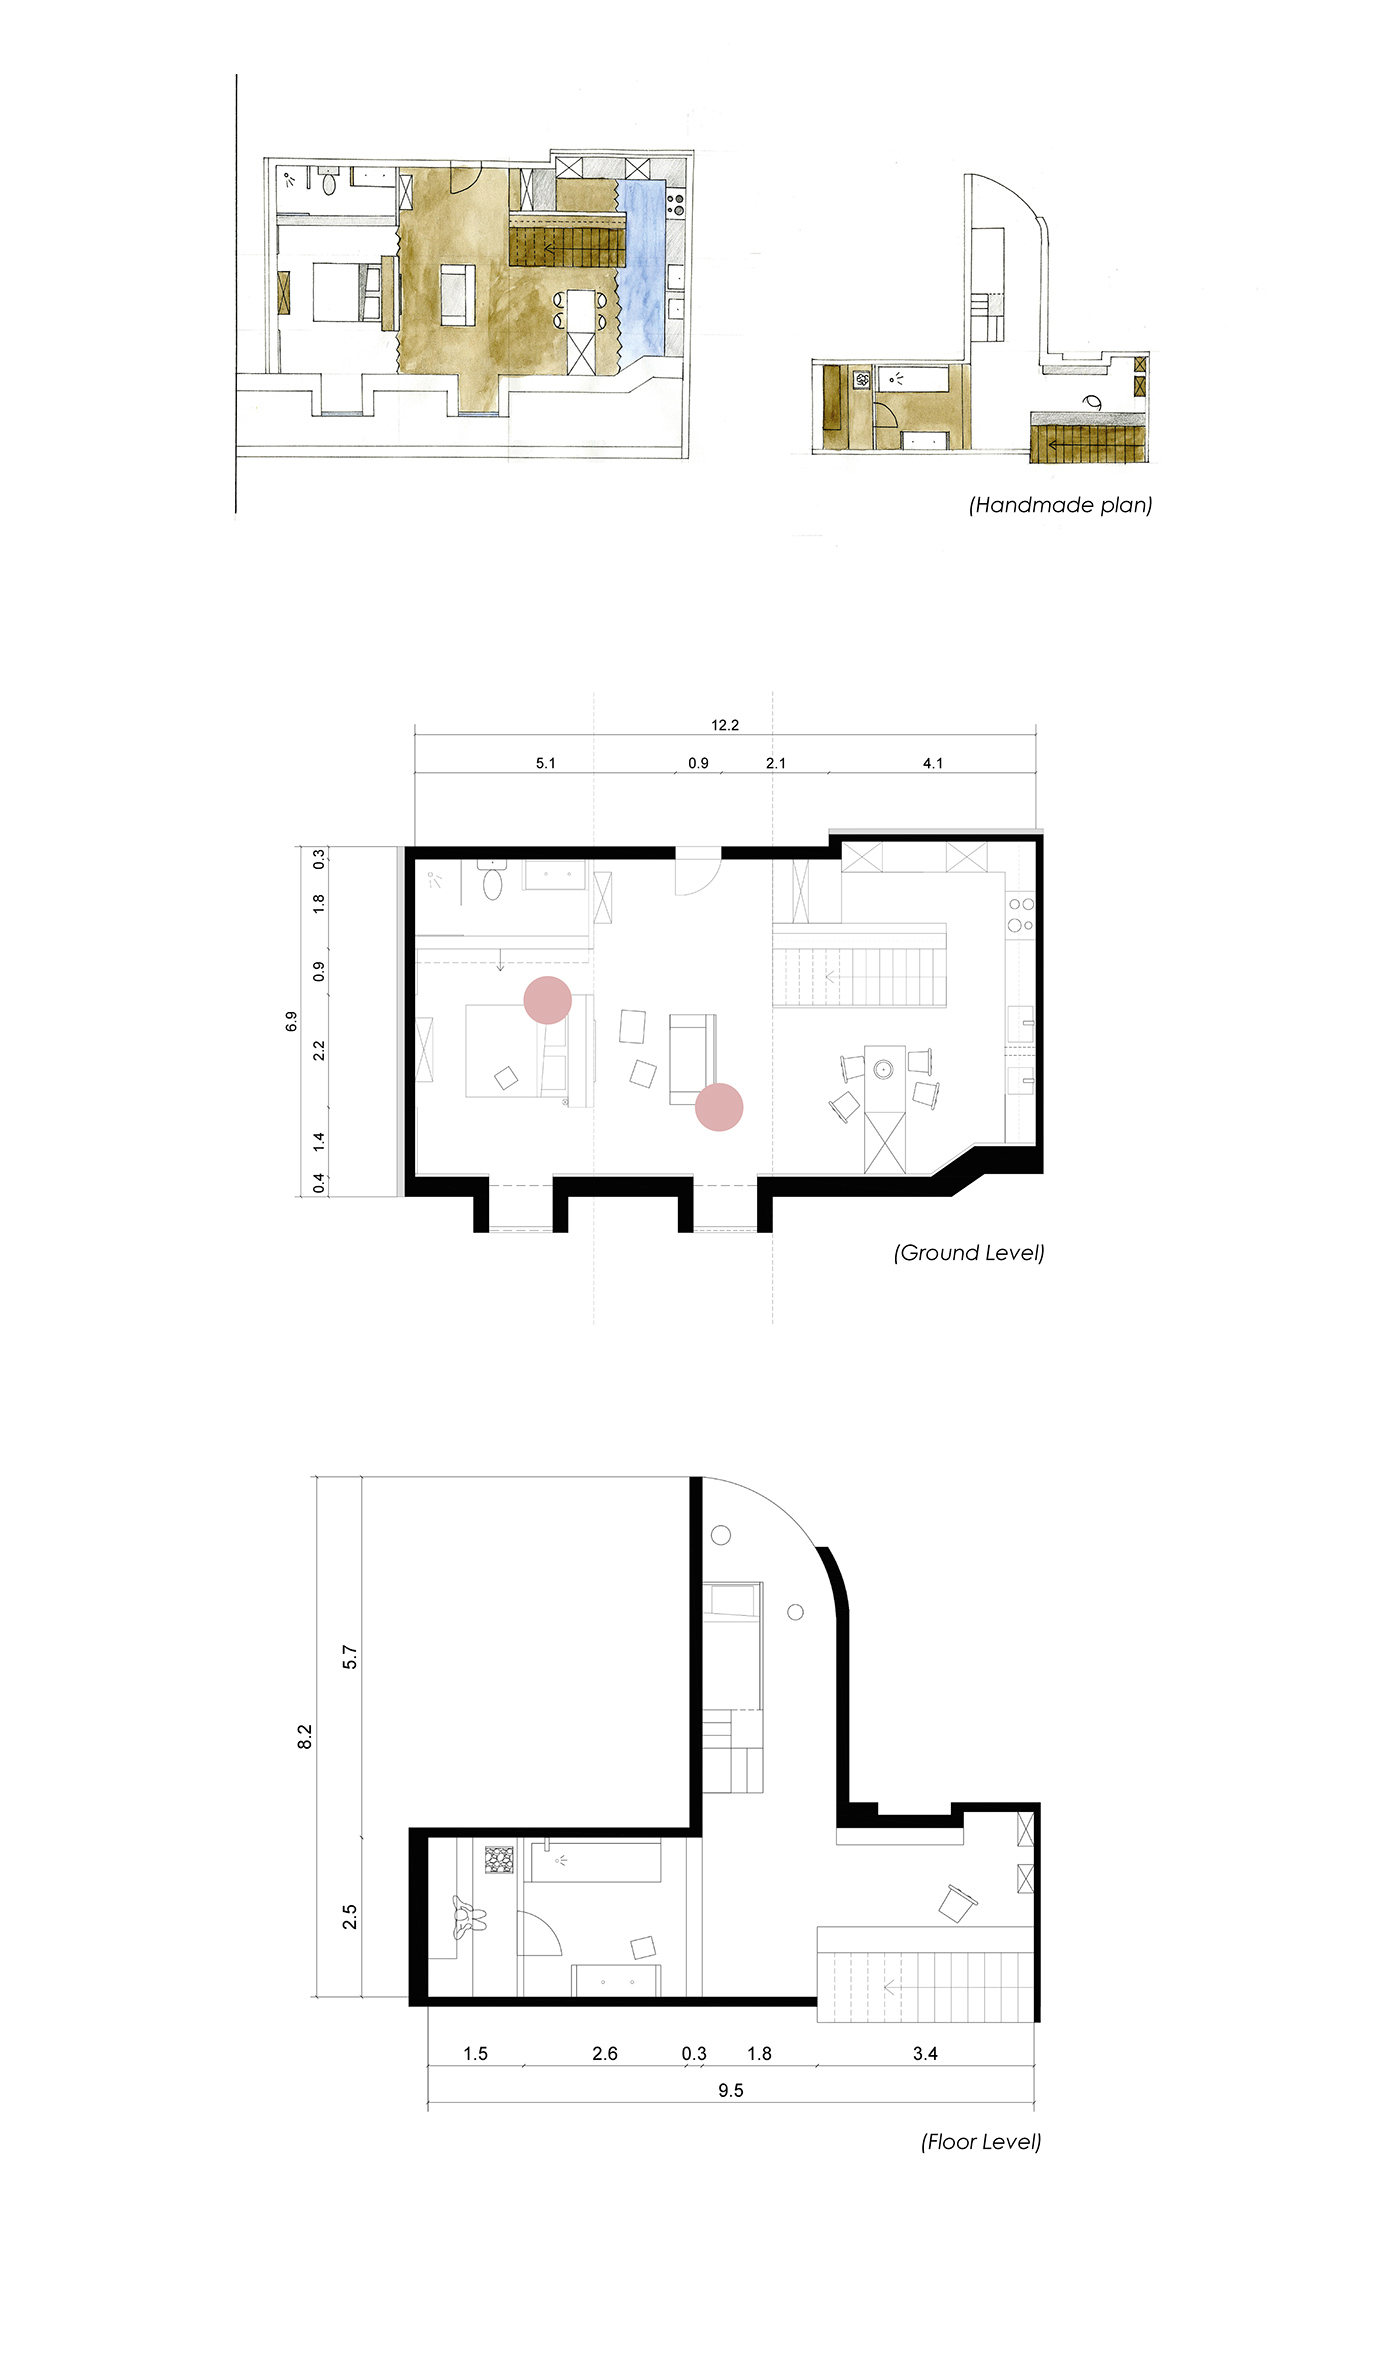 Level apartment finland helsinki pastel colors couple stairs handmade drawing bathroom bedroom mock-up lighting aquarelle water ink home